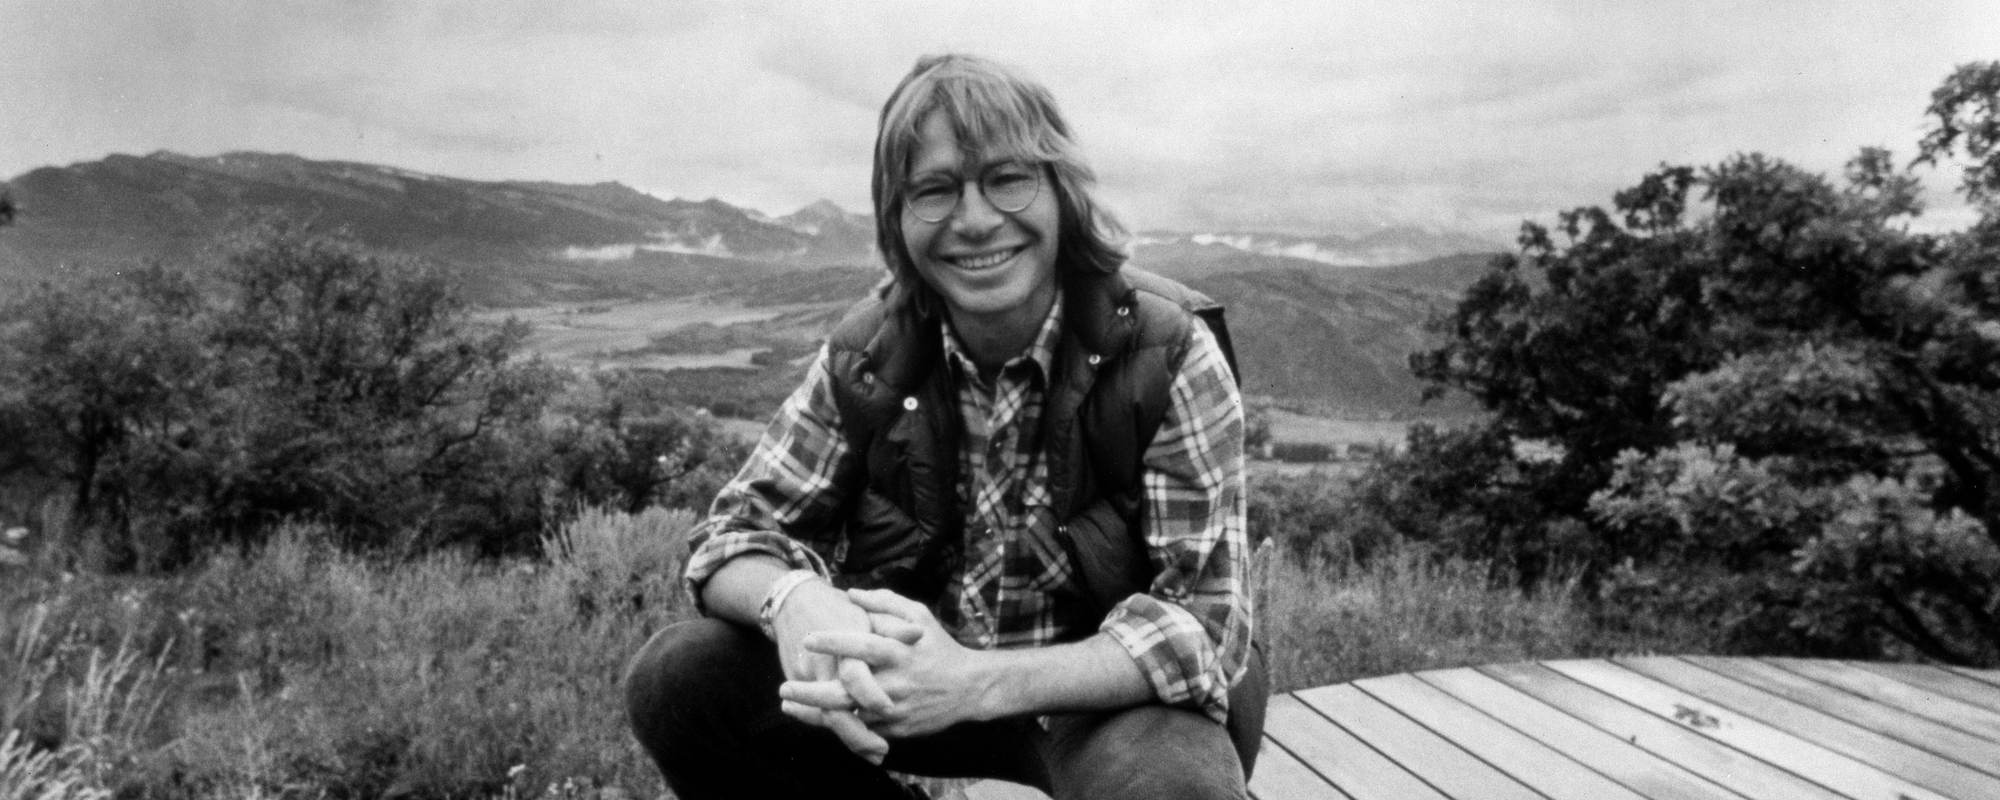 Behind the Meaning of “Rocky Mountain High” by John Denver